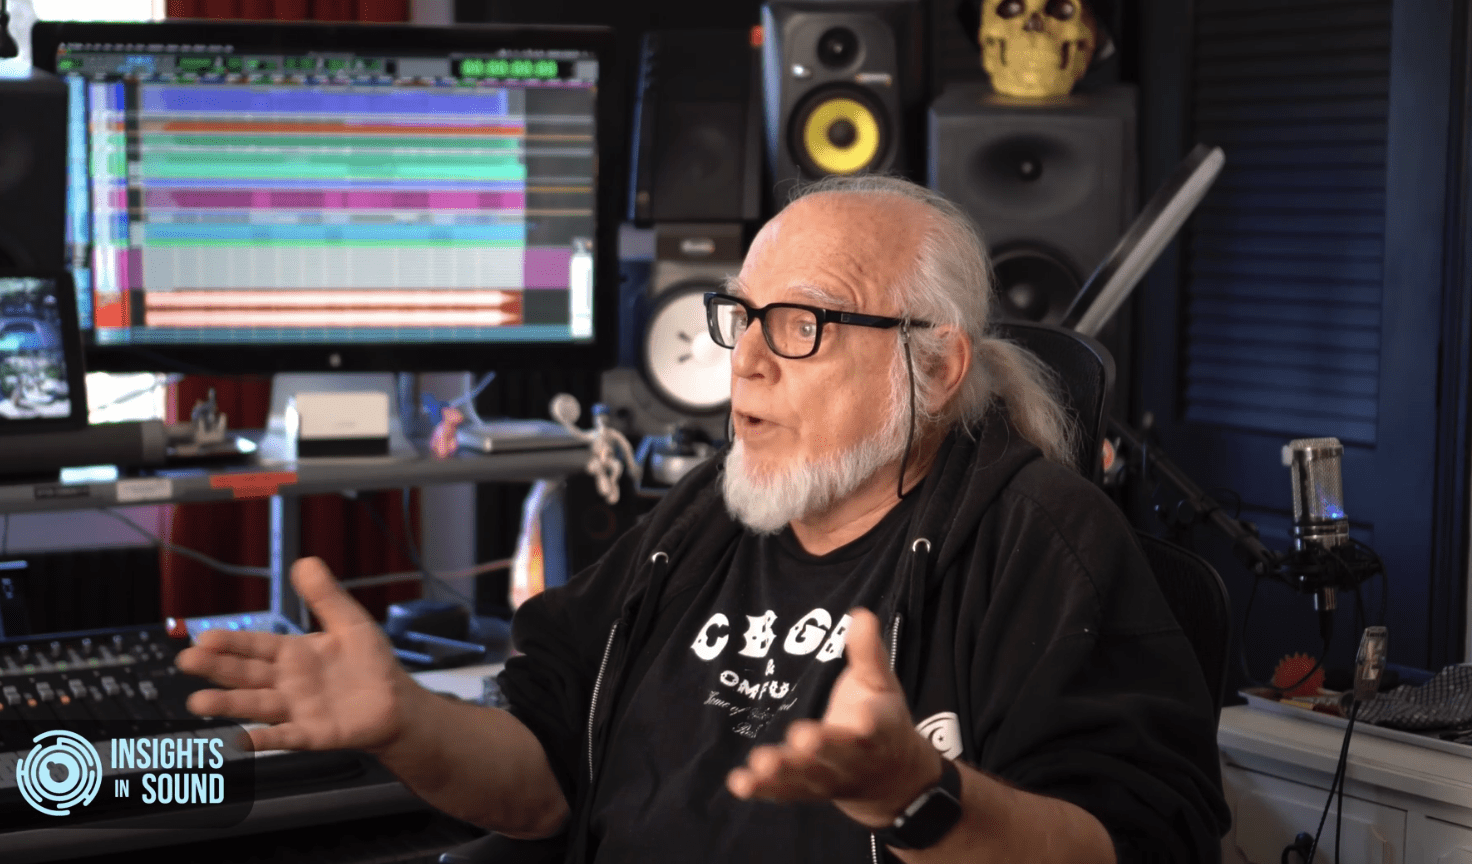 Insights In Sound – Ed Stasium, Producer/Engineer (Season 7, Episode 10)